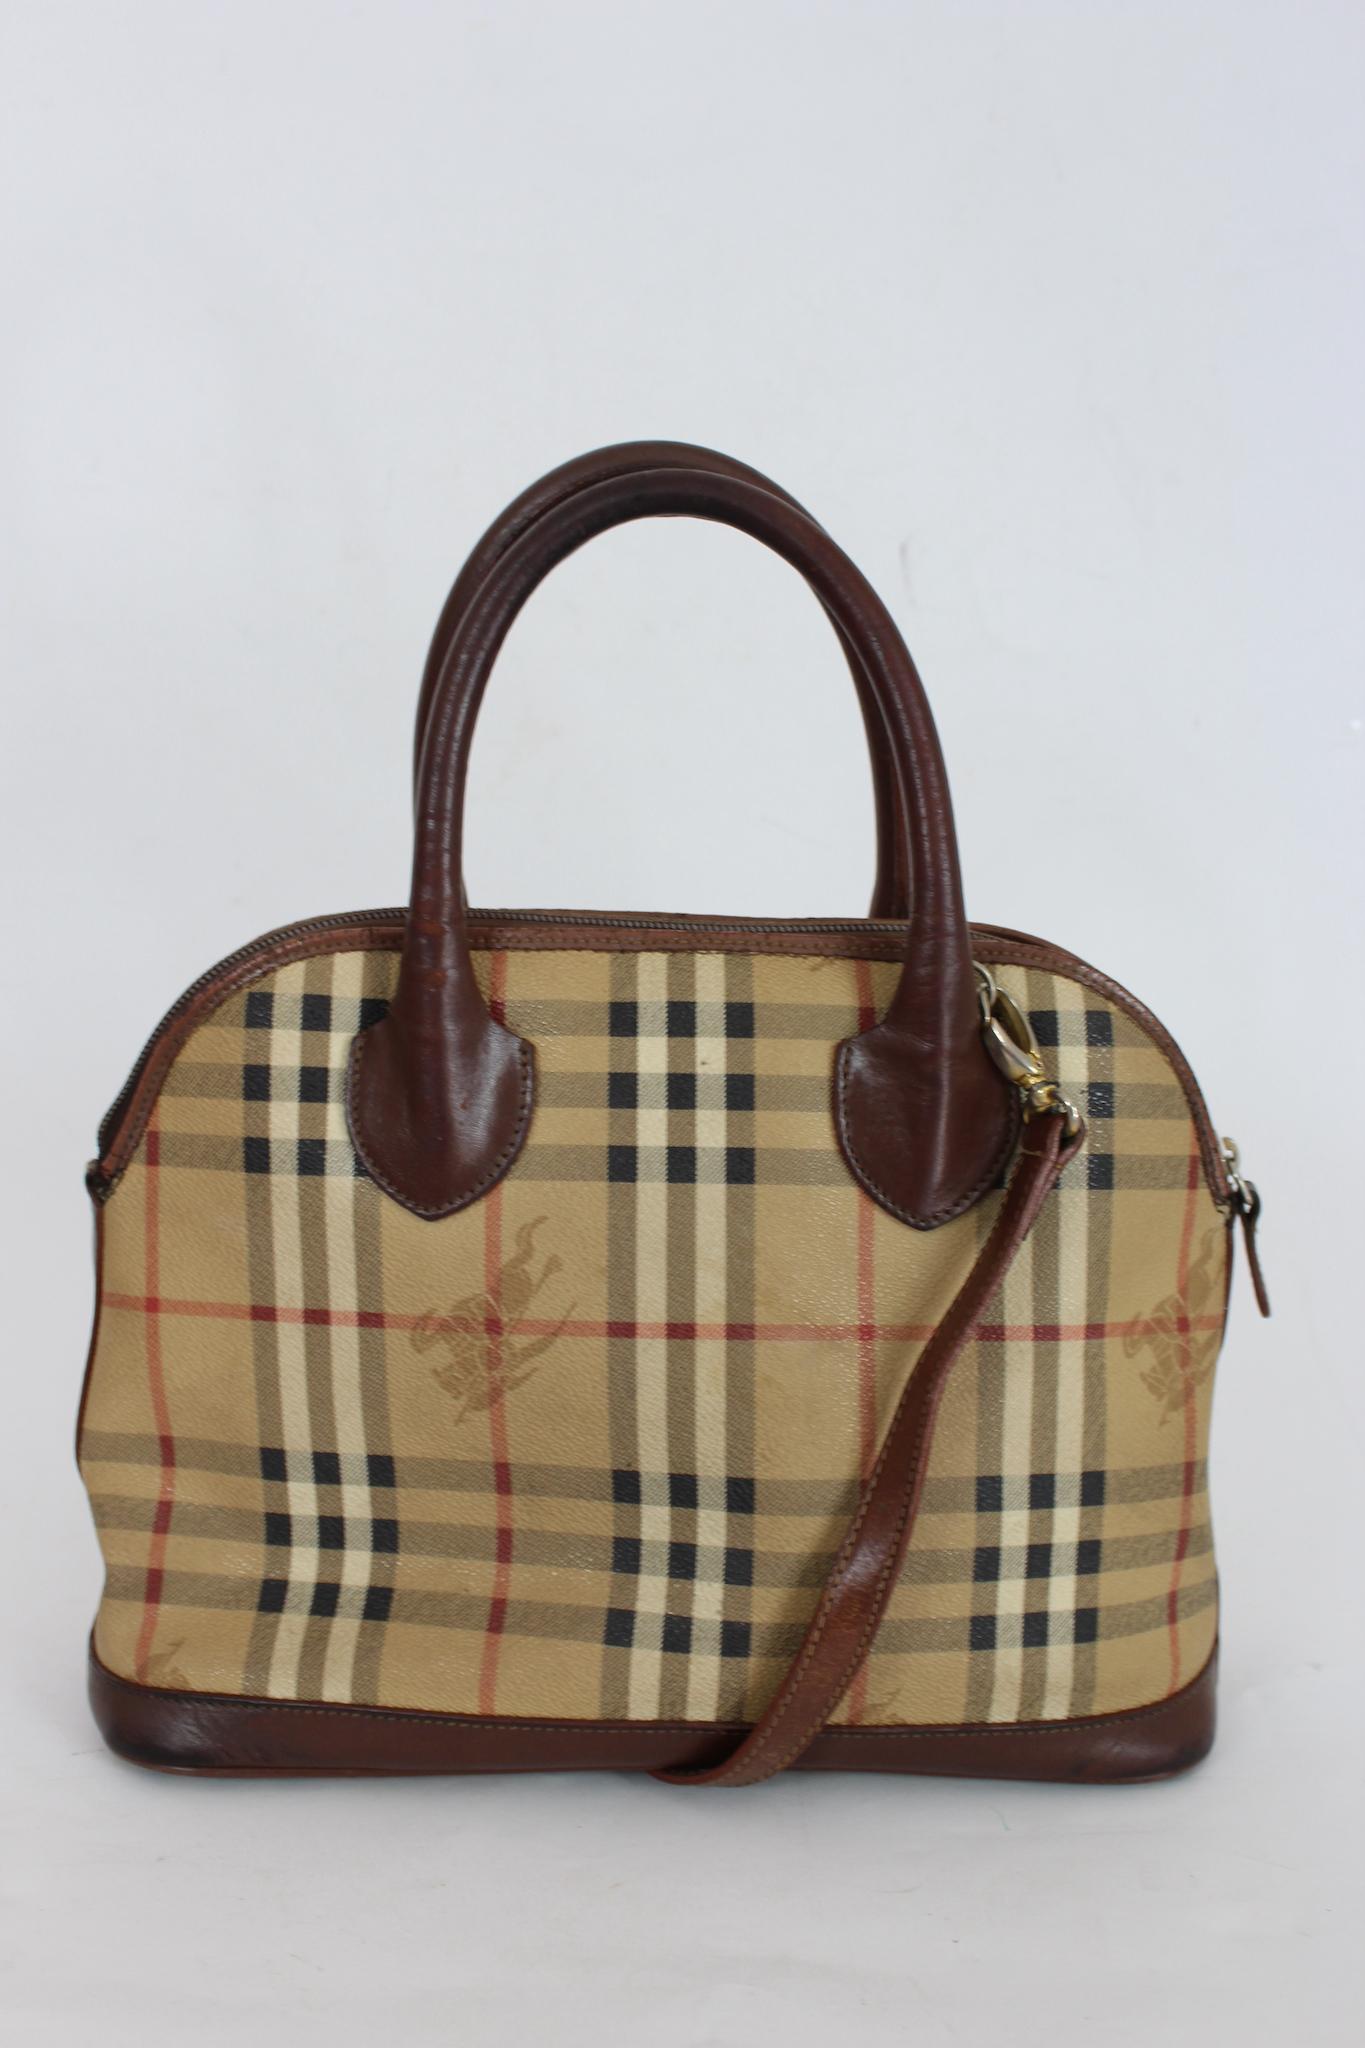 Burberry Vintage bag from the 90s. Classic beige canvas texture, with brown leather inserts. Large and comfortable brown leather handles. A long shoulder strap allows you to carry the bag over the shoulder. The internal space is very large, and